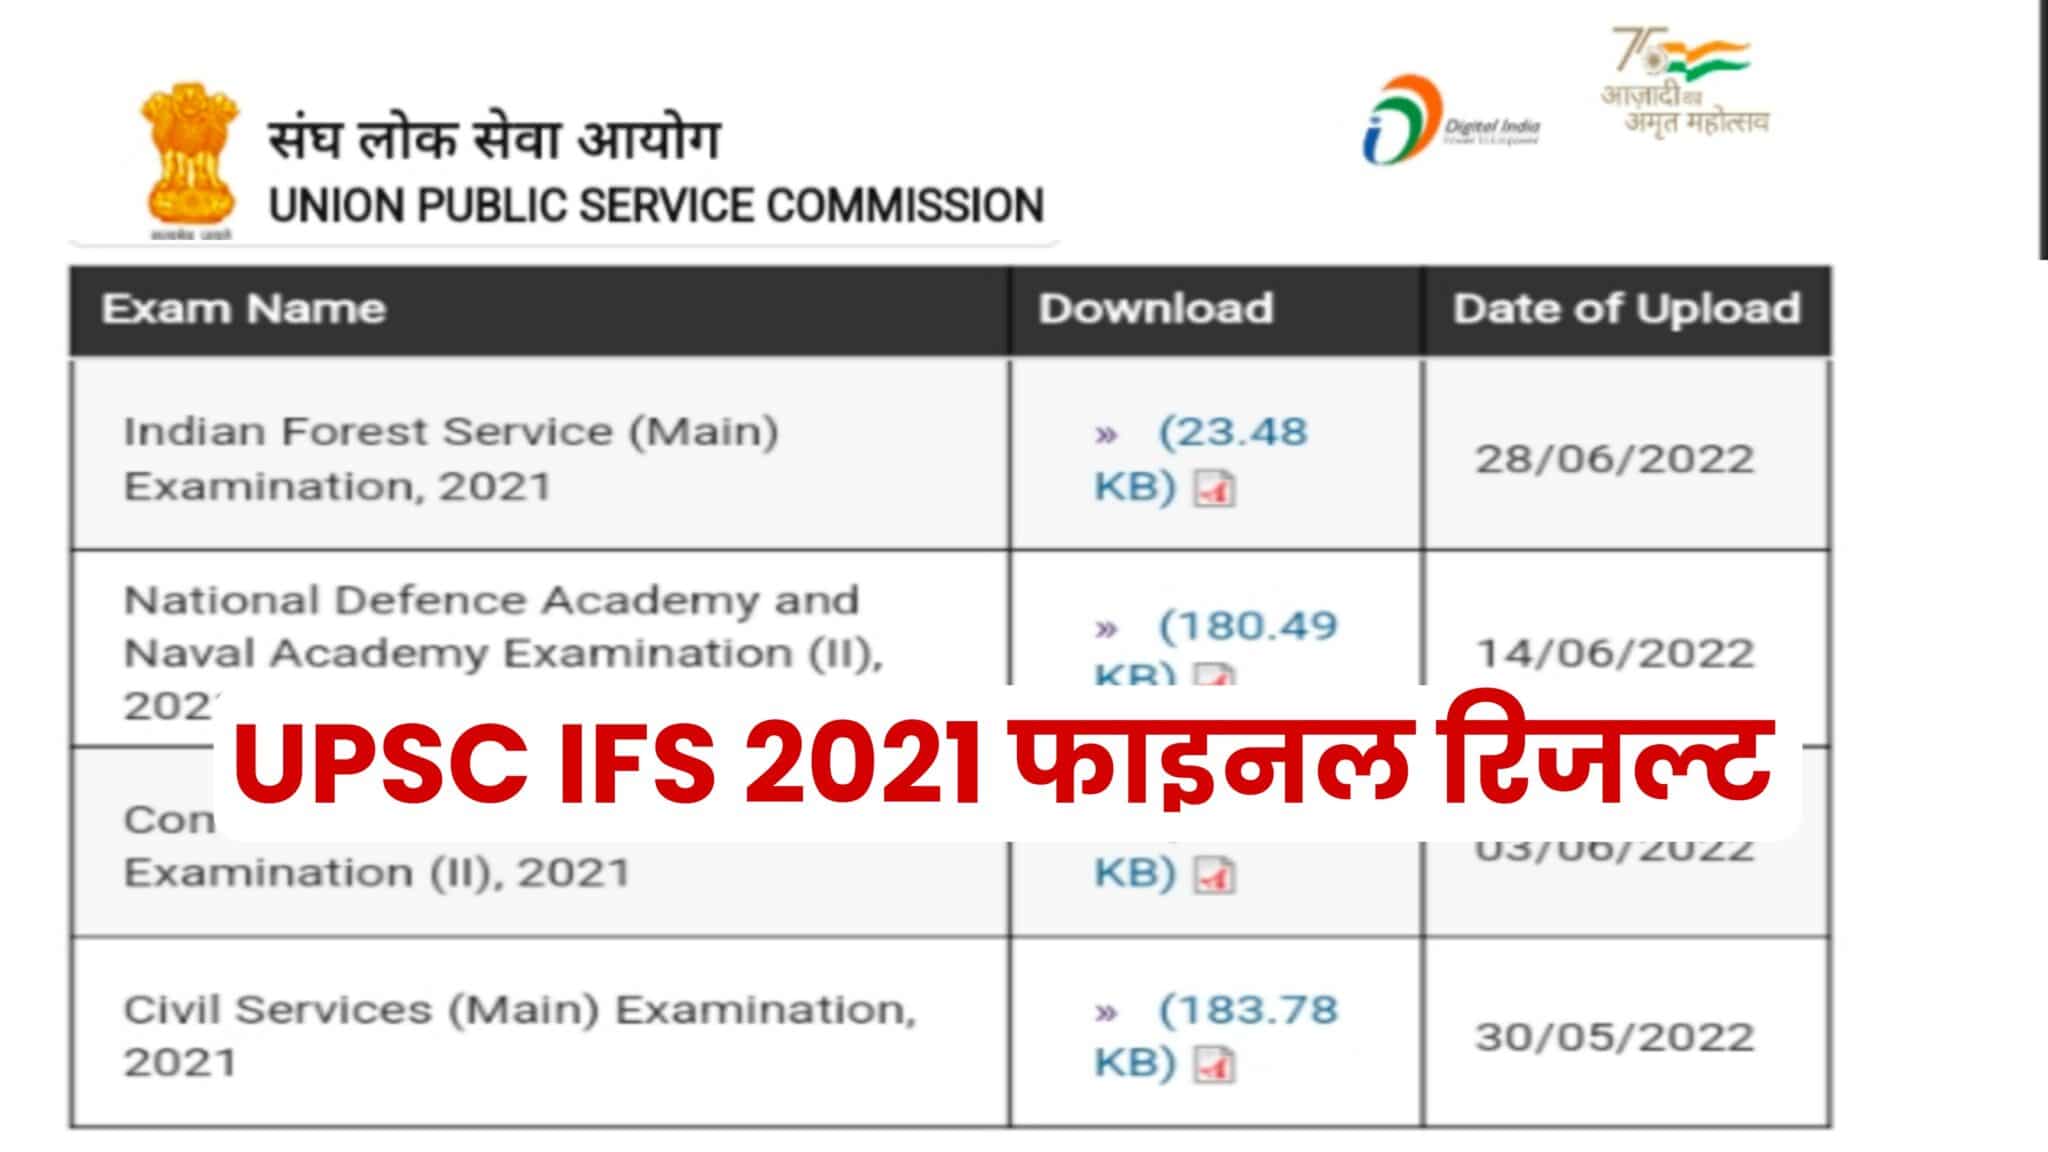 UPSC IFS 2021 Final Result with Marks